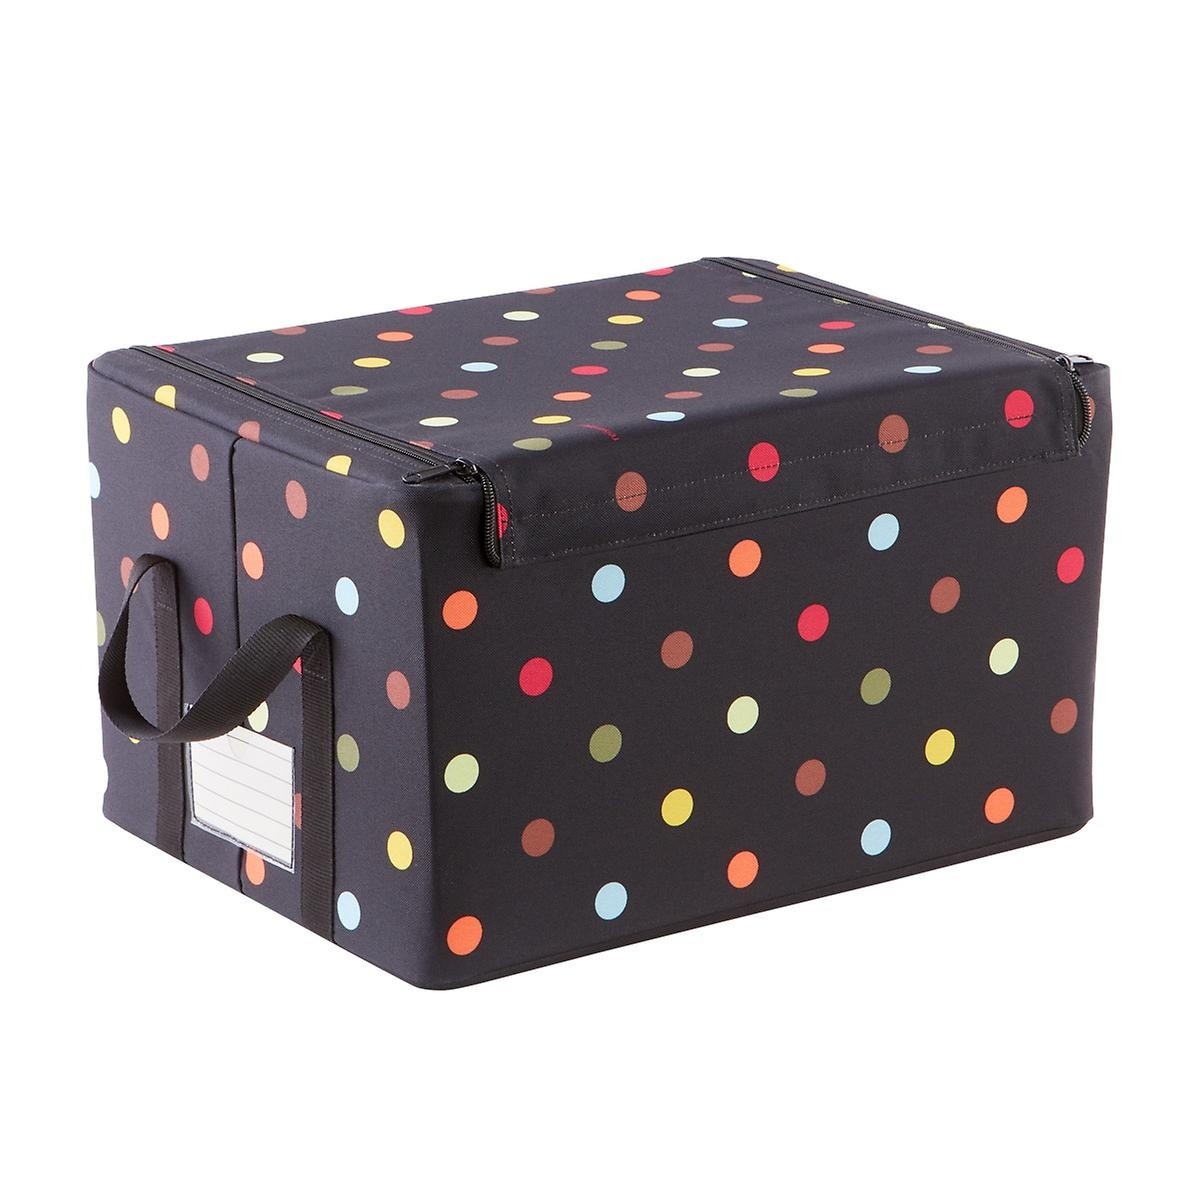 Reisenthel multi dot fabric storage boxes with handles